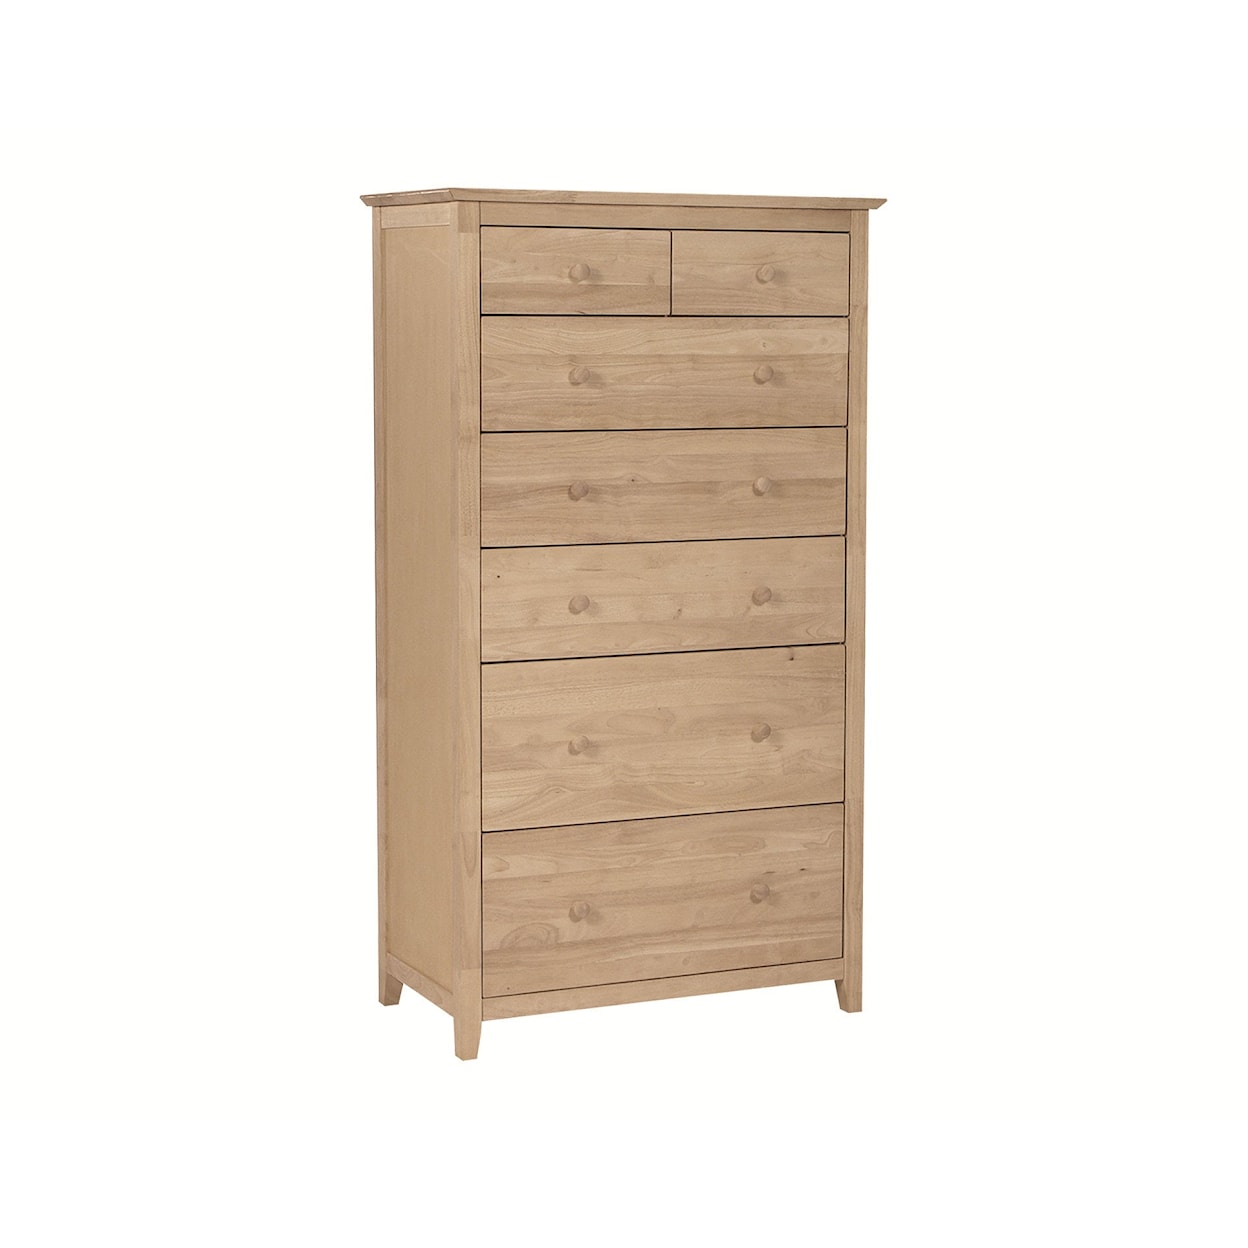 John Thomas SELECT Bedroom Lancaster 7-Drawer Carriage Chest